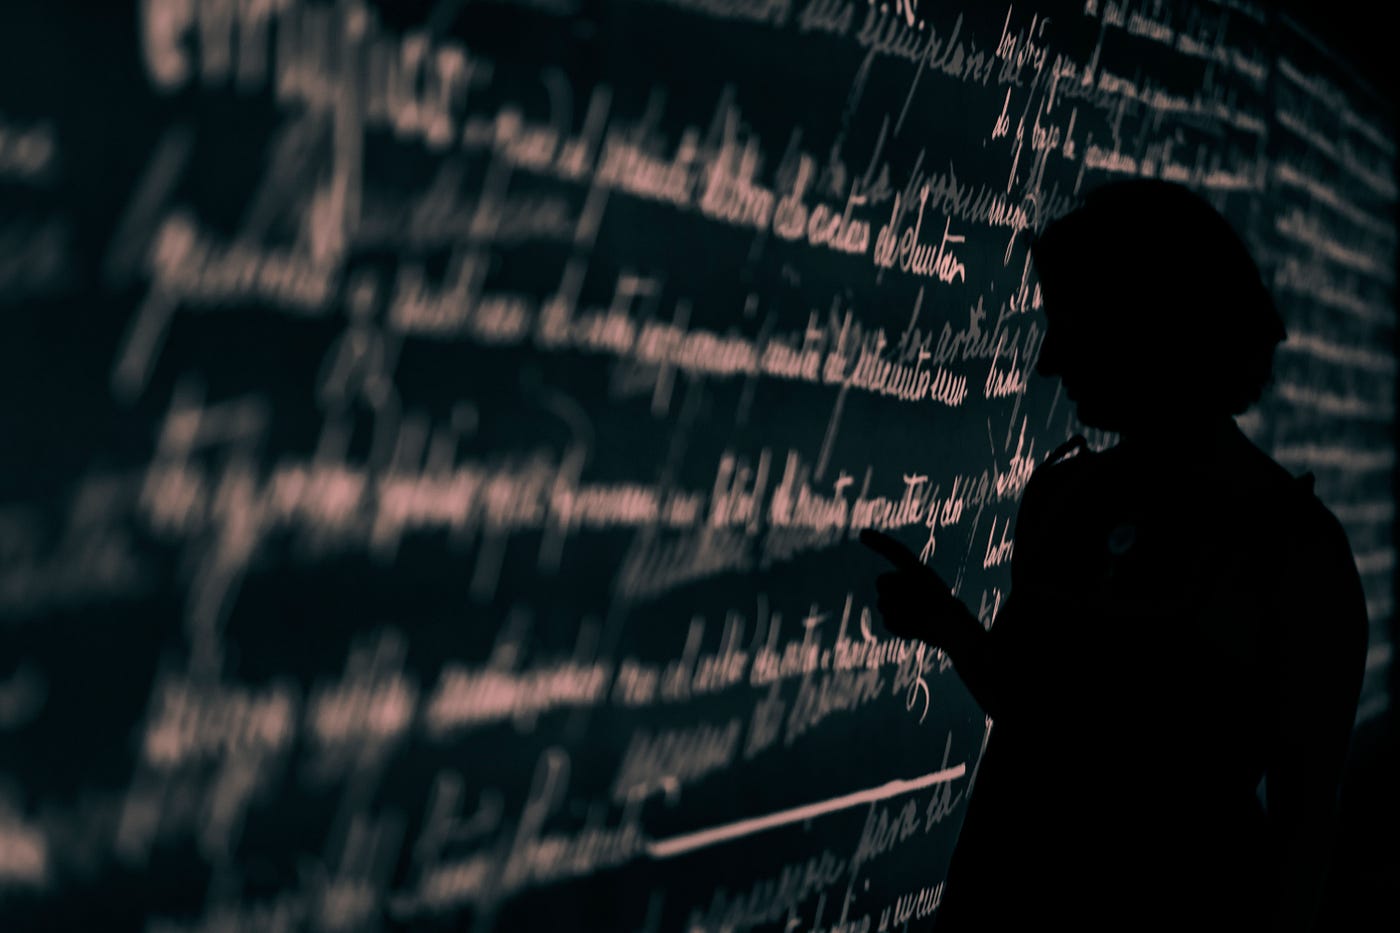 Blurred cursive (in a foreign language) on a black board, written in white letters.